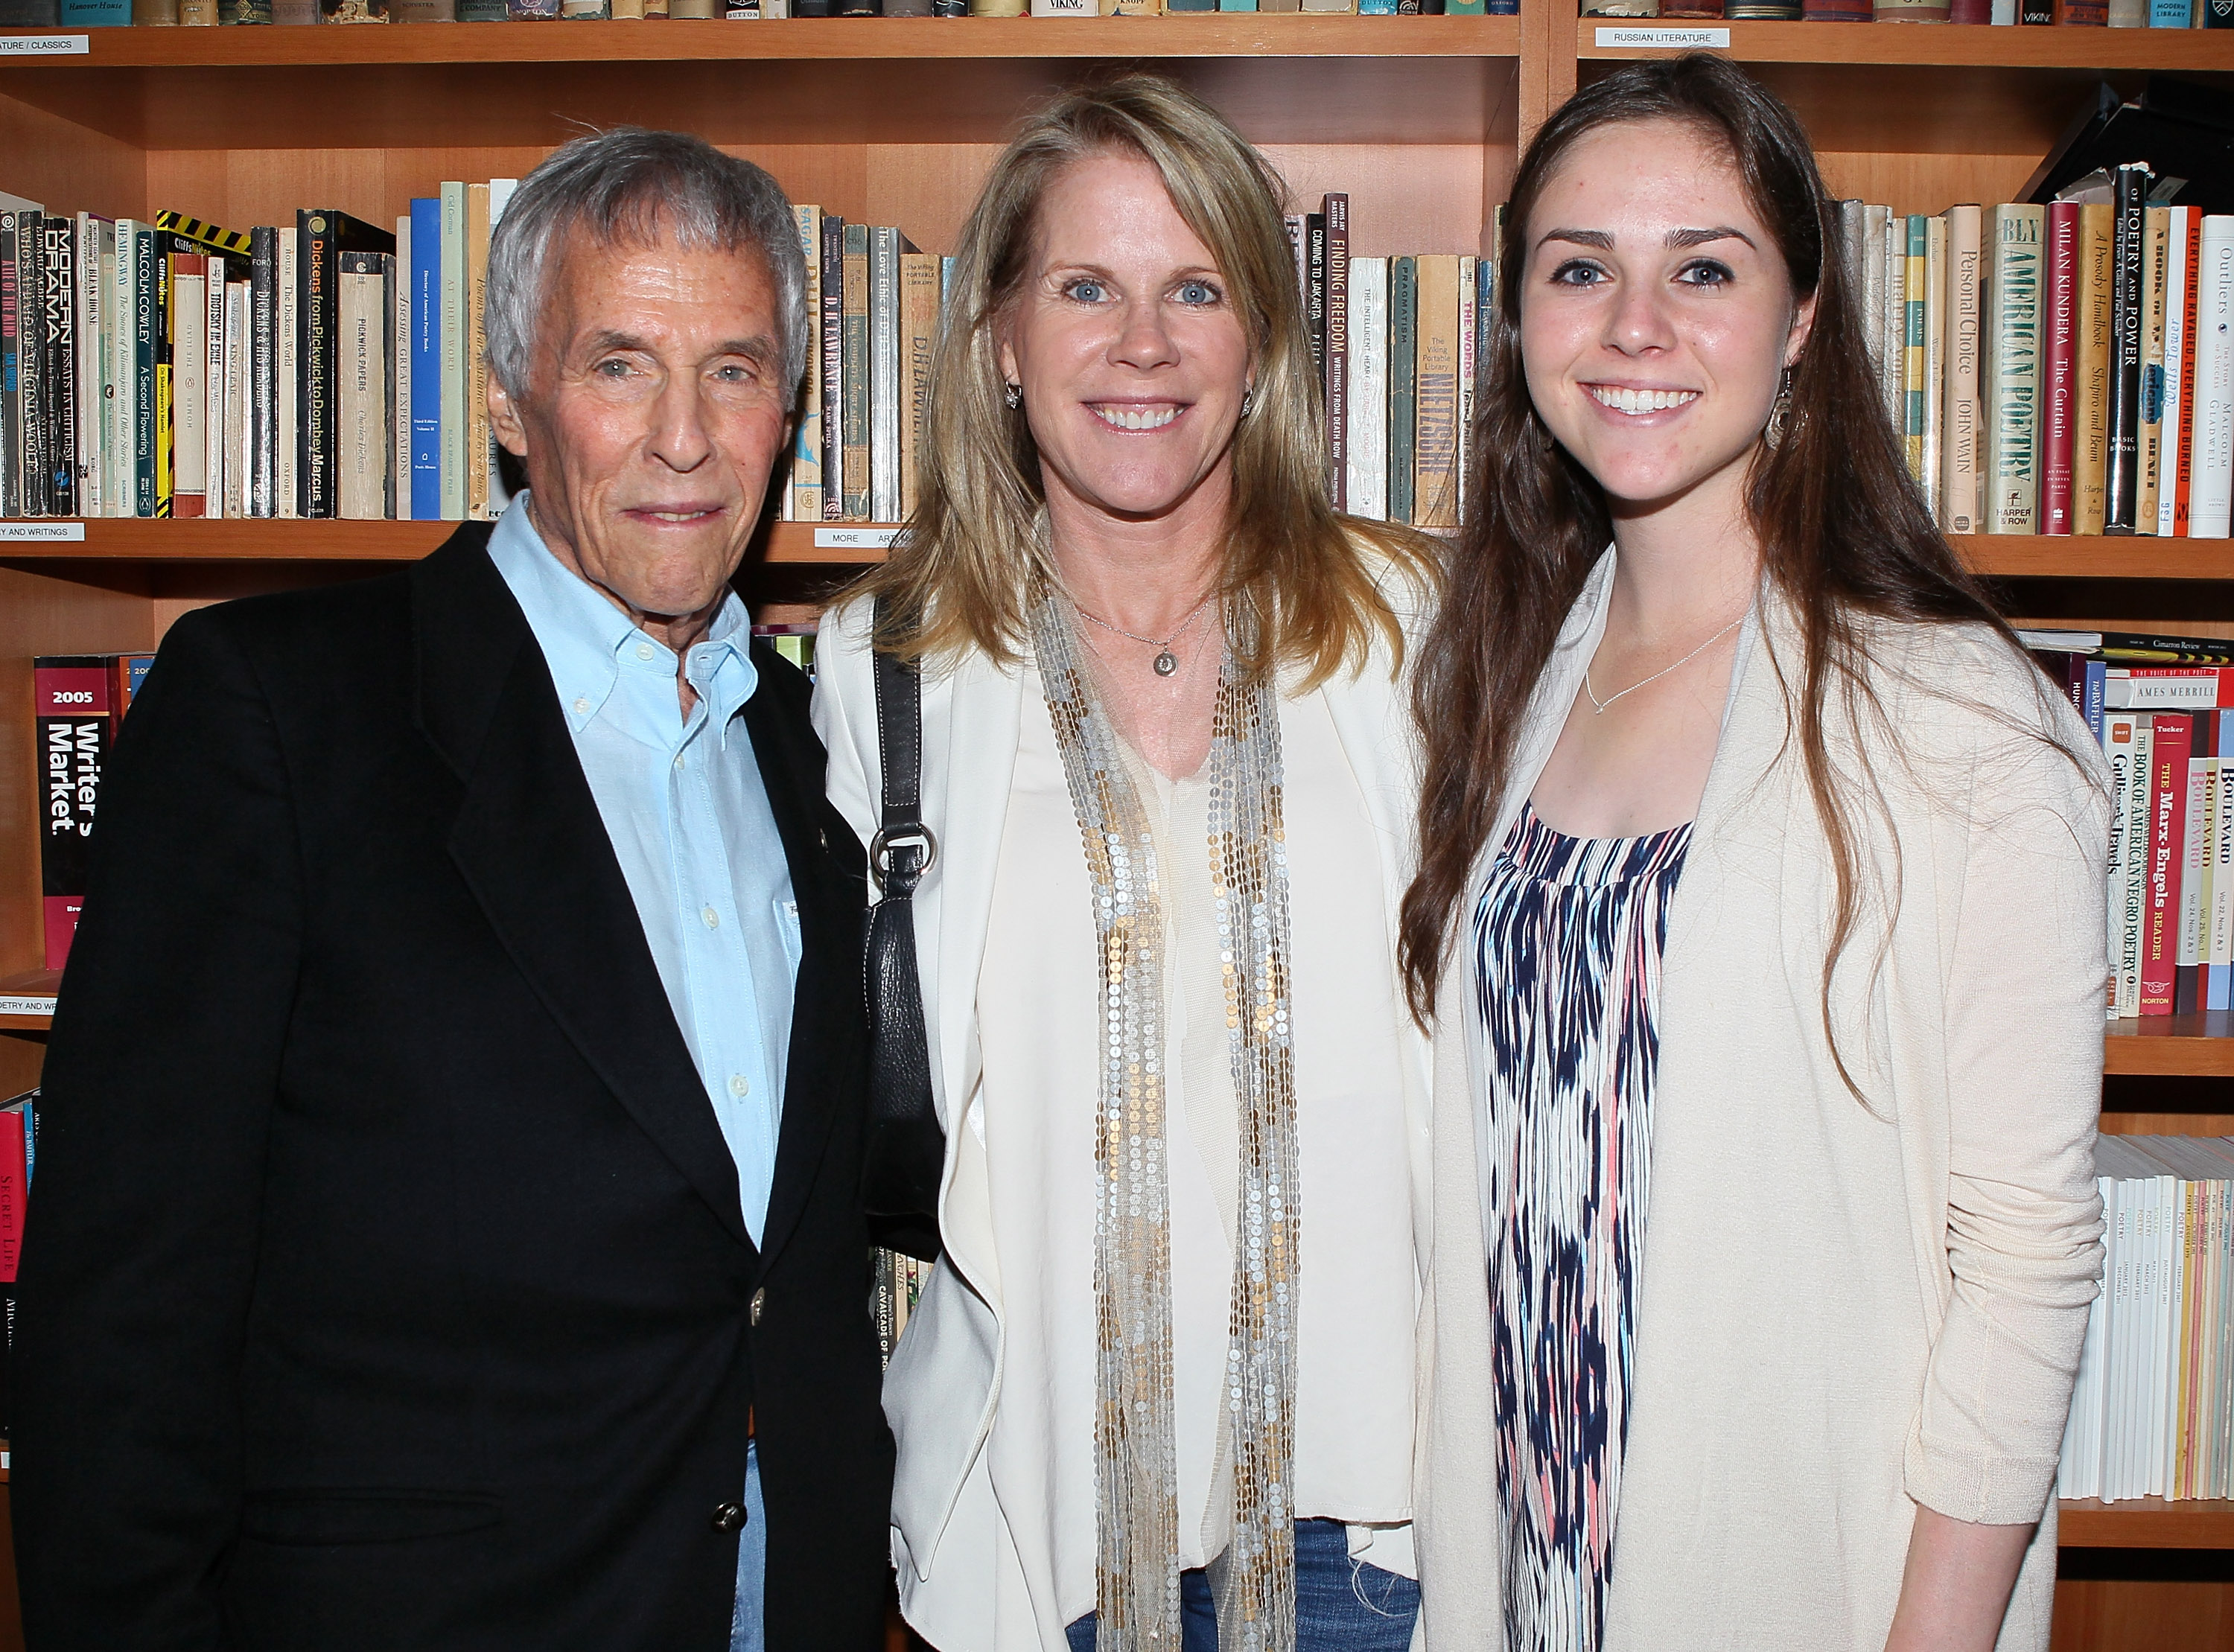 Burt Bacharach, his wife, Jane Hansen, and daughter, Raleigh Bacharach at "An Evening with Burt Bacharach" presented by Live Talks Los Angeles on May 17, 2013, in Santa Monica, California | Source: Getty Images